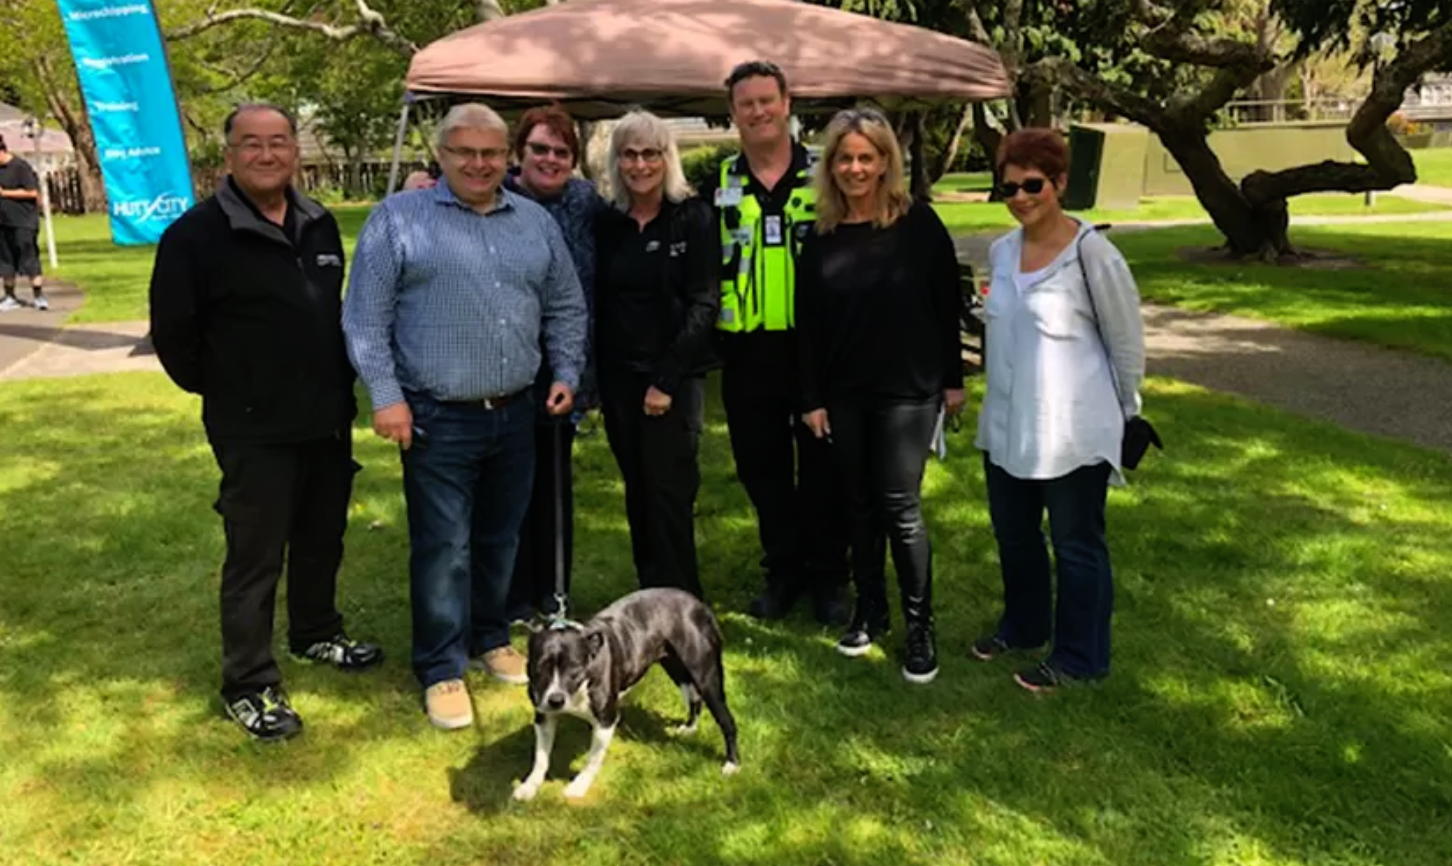 A Dog’s Day Out proved a big hit earlier this month for the dog owners participating in the Doggone trials with Hutt and Hamilton City Councils.